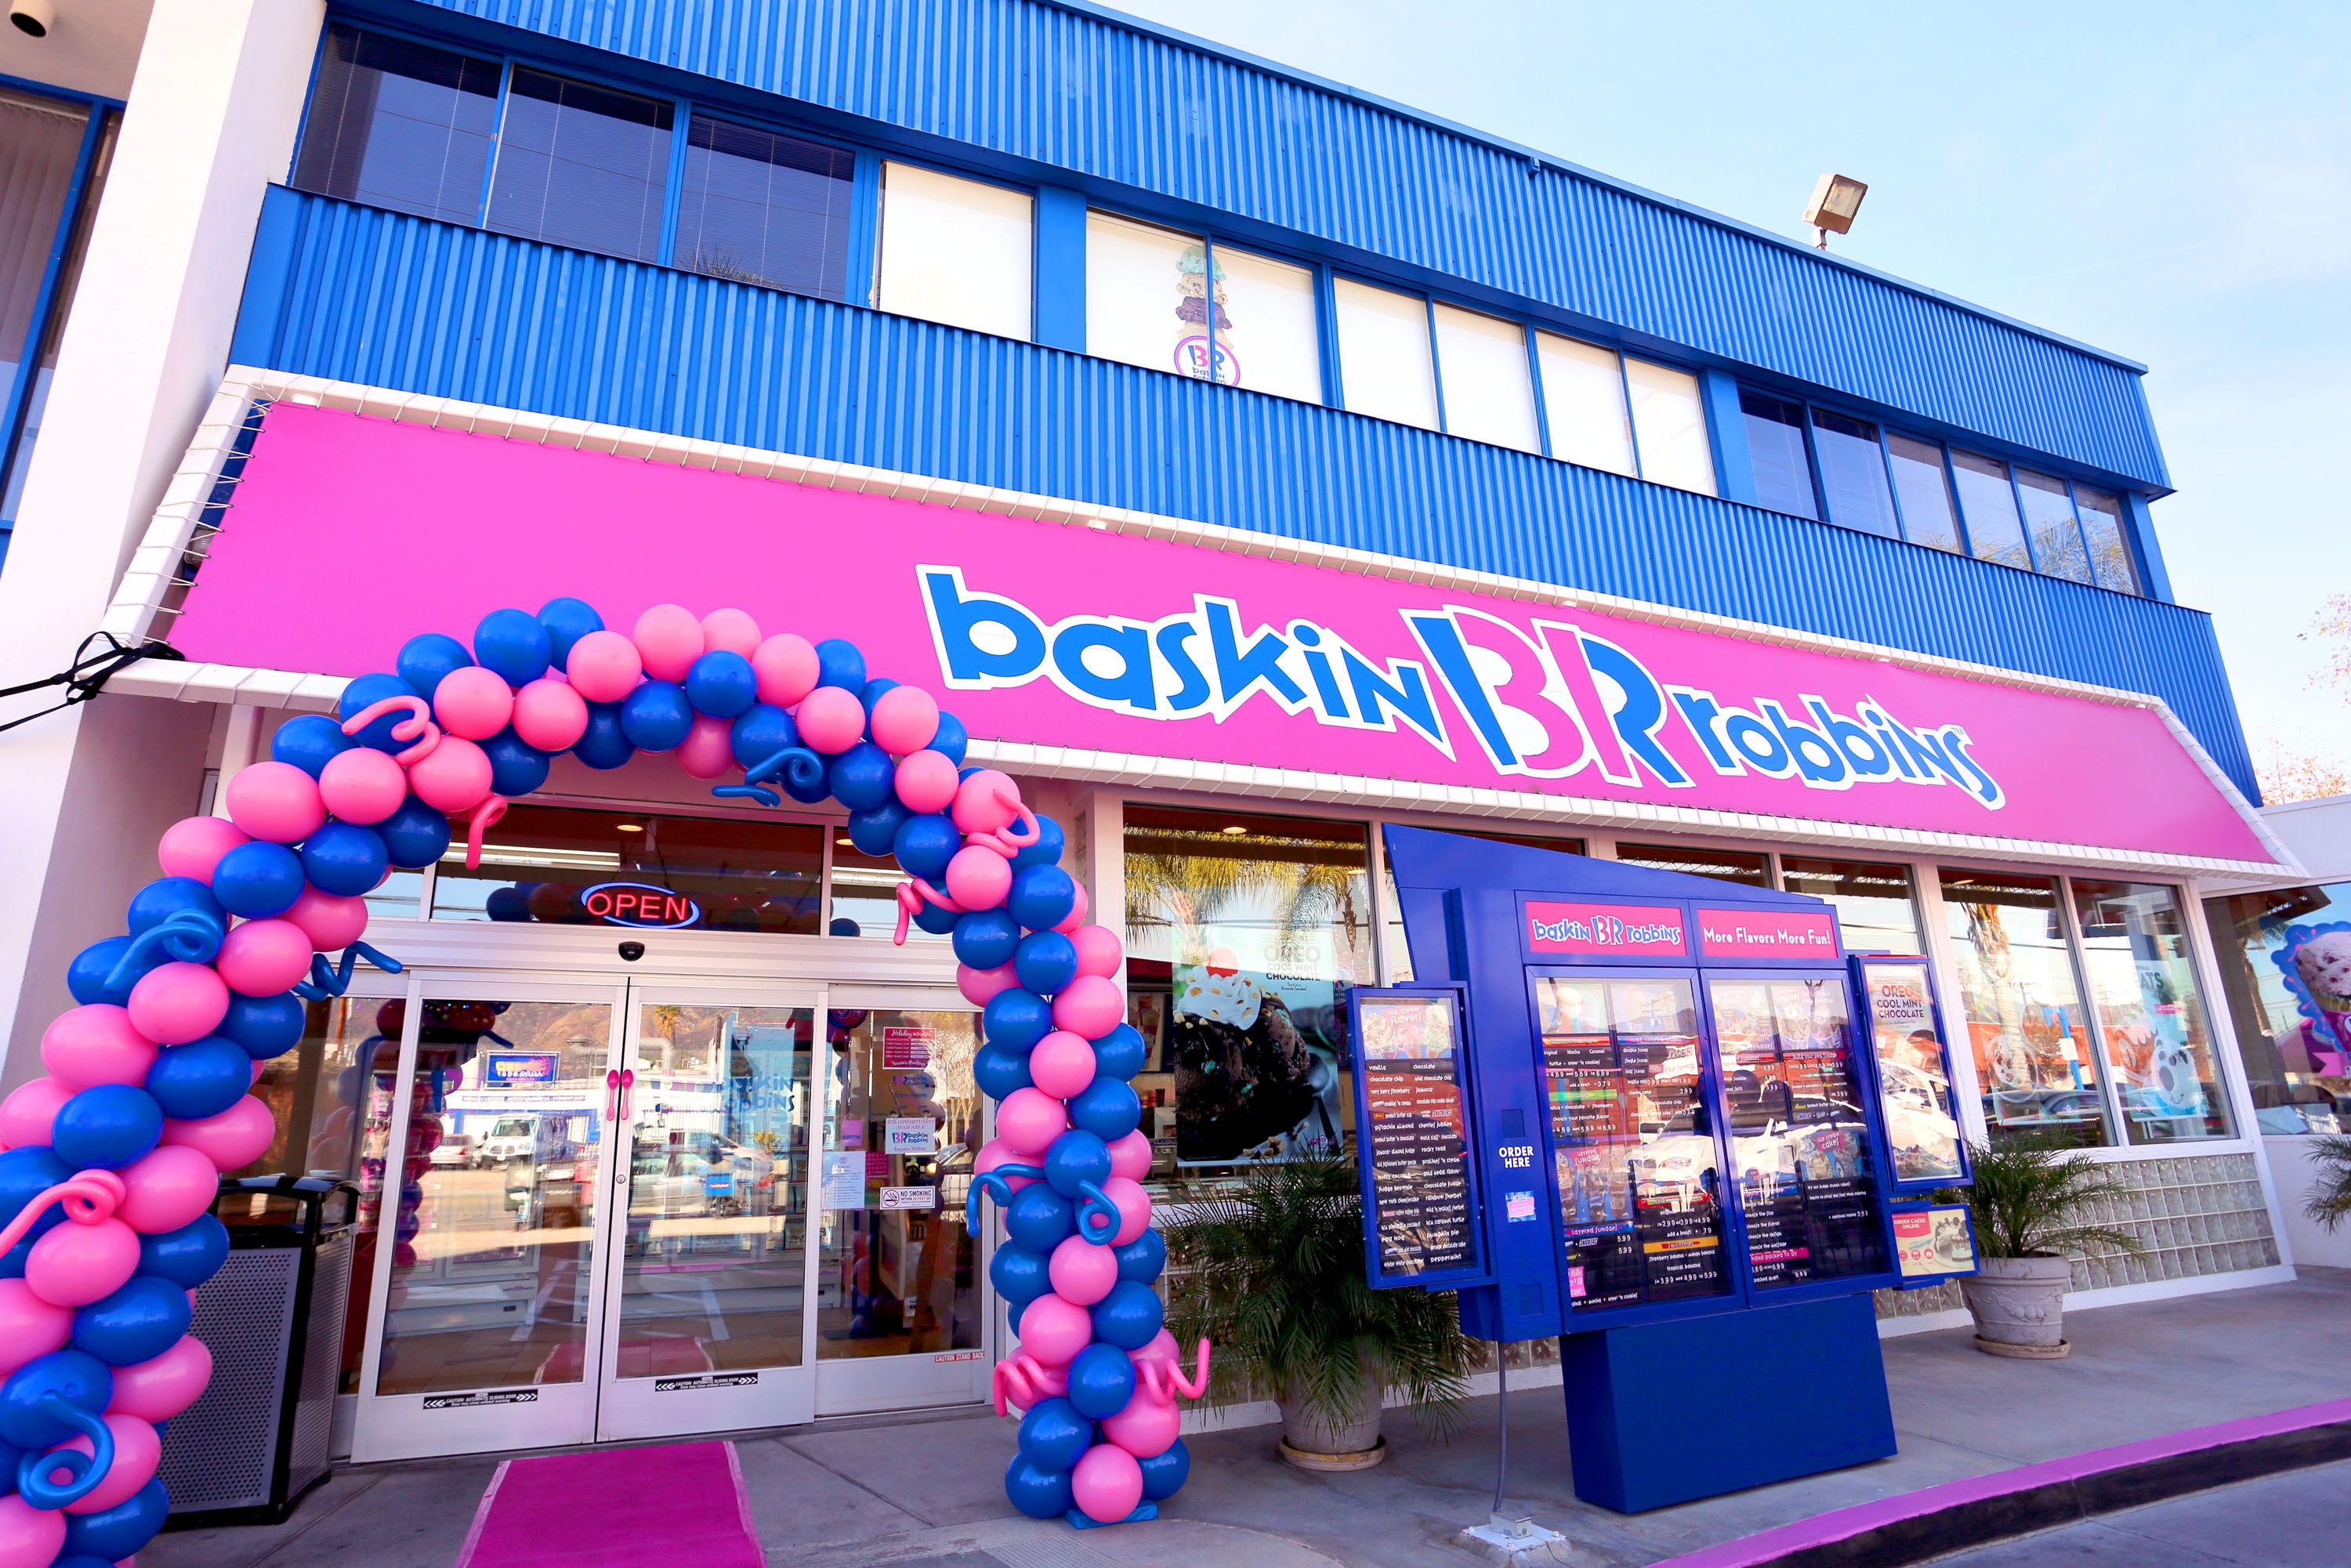 14 Things You Need To Know Before Eating At Baskin-Robbins - Delish.com